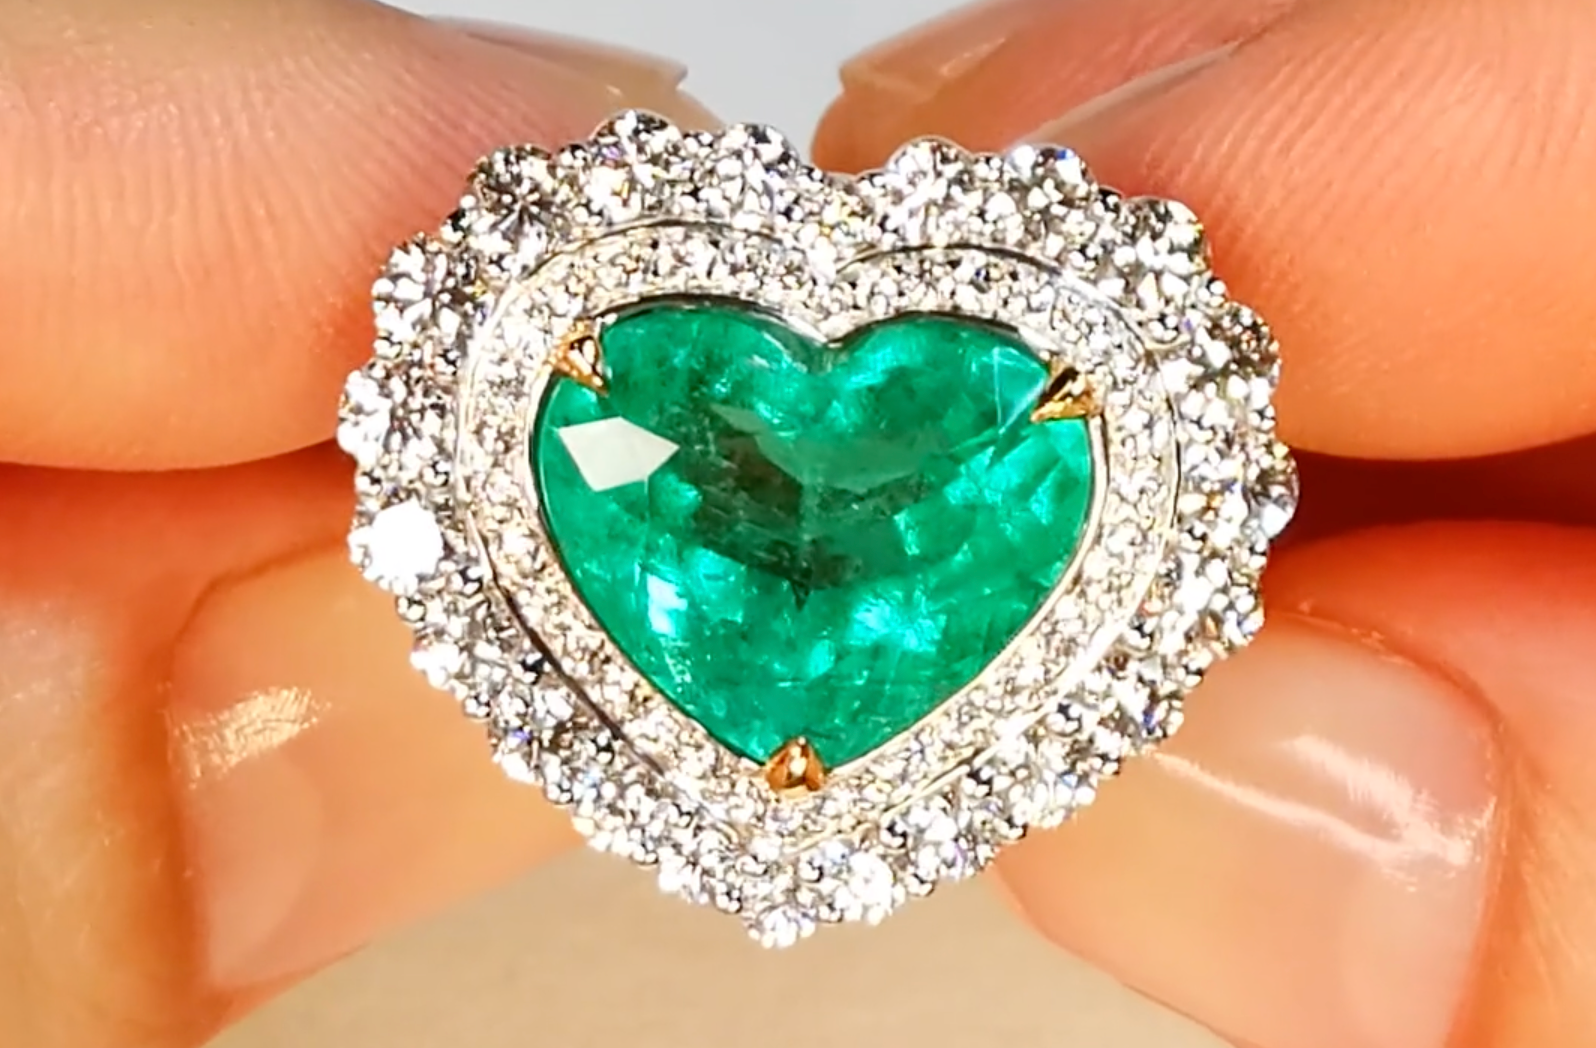 6.27ct Vivid Green Muzo Colombian Emerald Ring with D Flawless Diamonds set in 18K White Gold